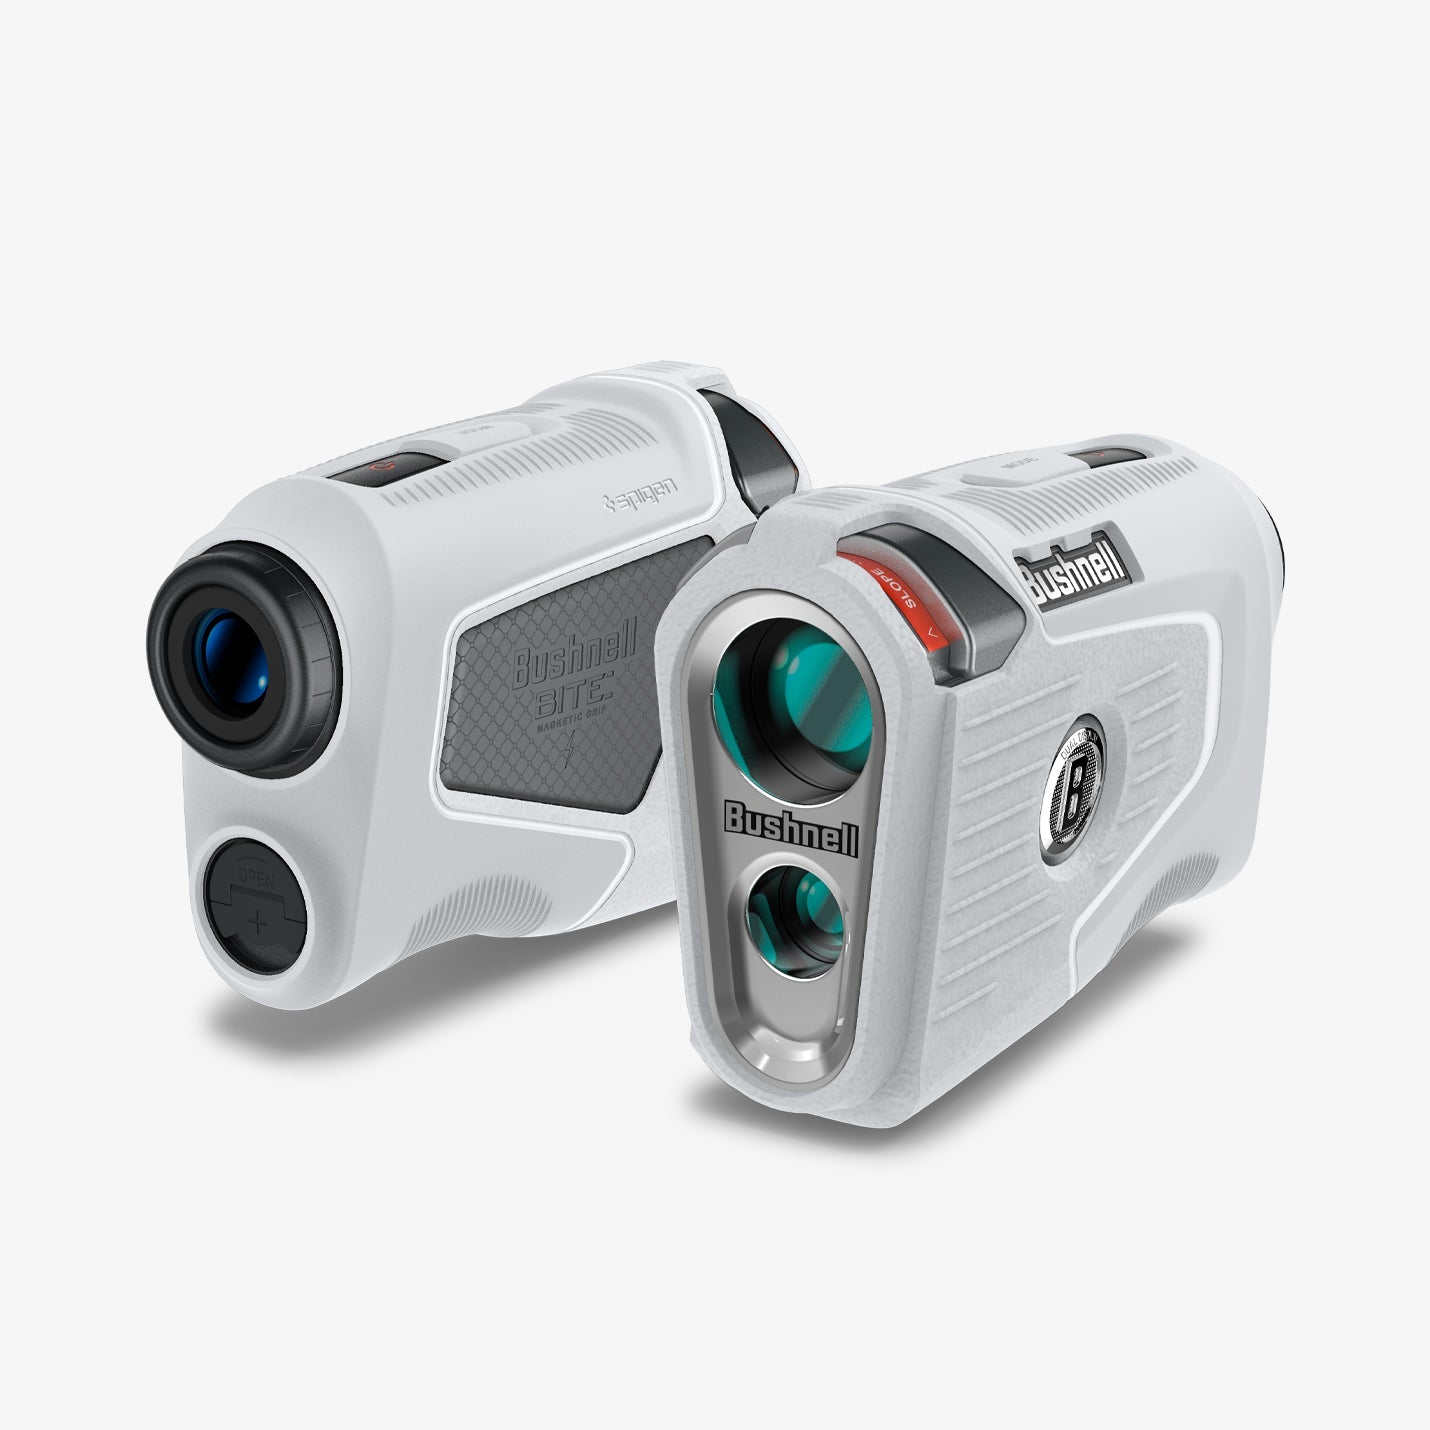 ACS06152 - Bushnell Pro X3 Rangefinder Case Silicone Fit in light gray showing the back, front and sides